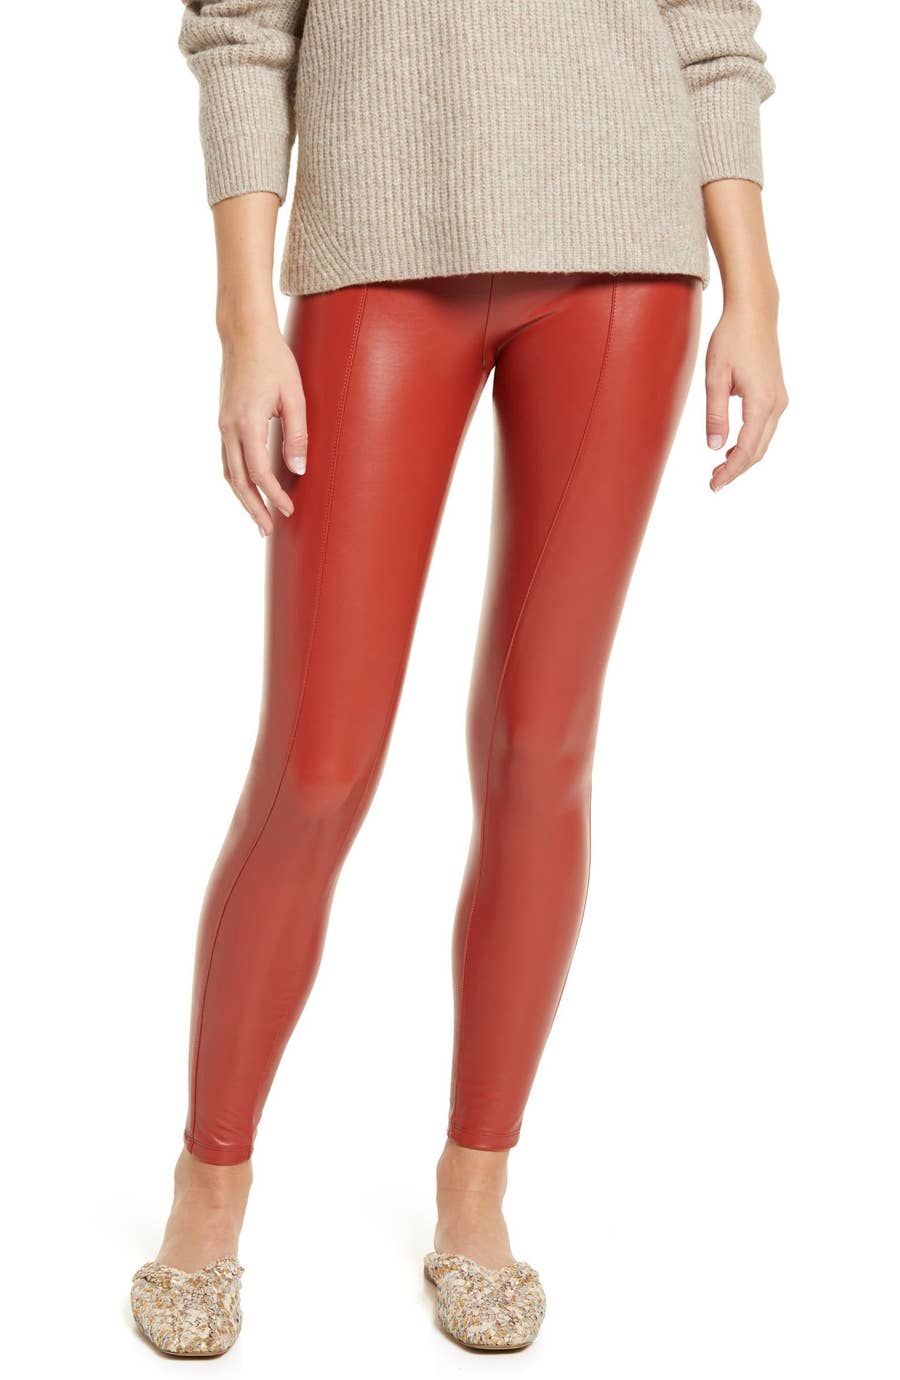 Instant Favorite Legging - Galaxy Faux Leather Print - Red Tulip Boutique